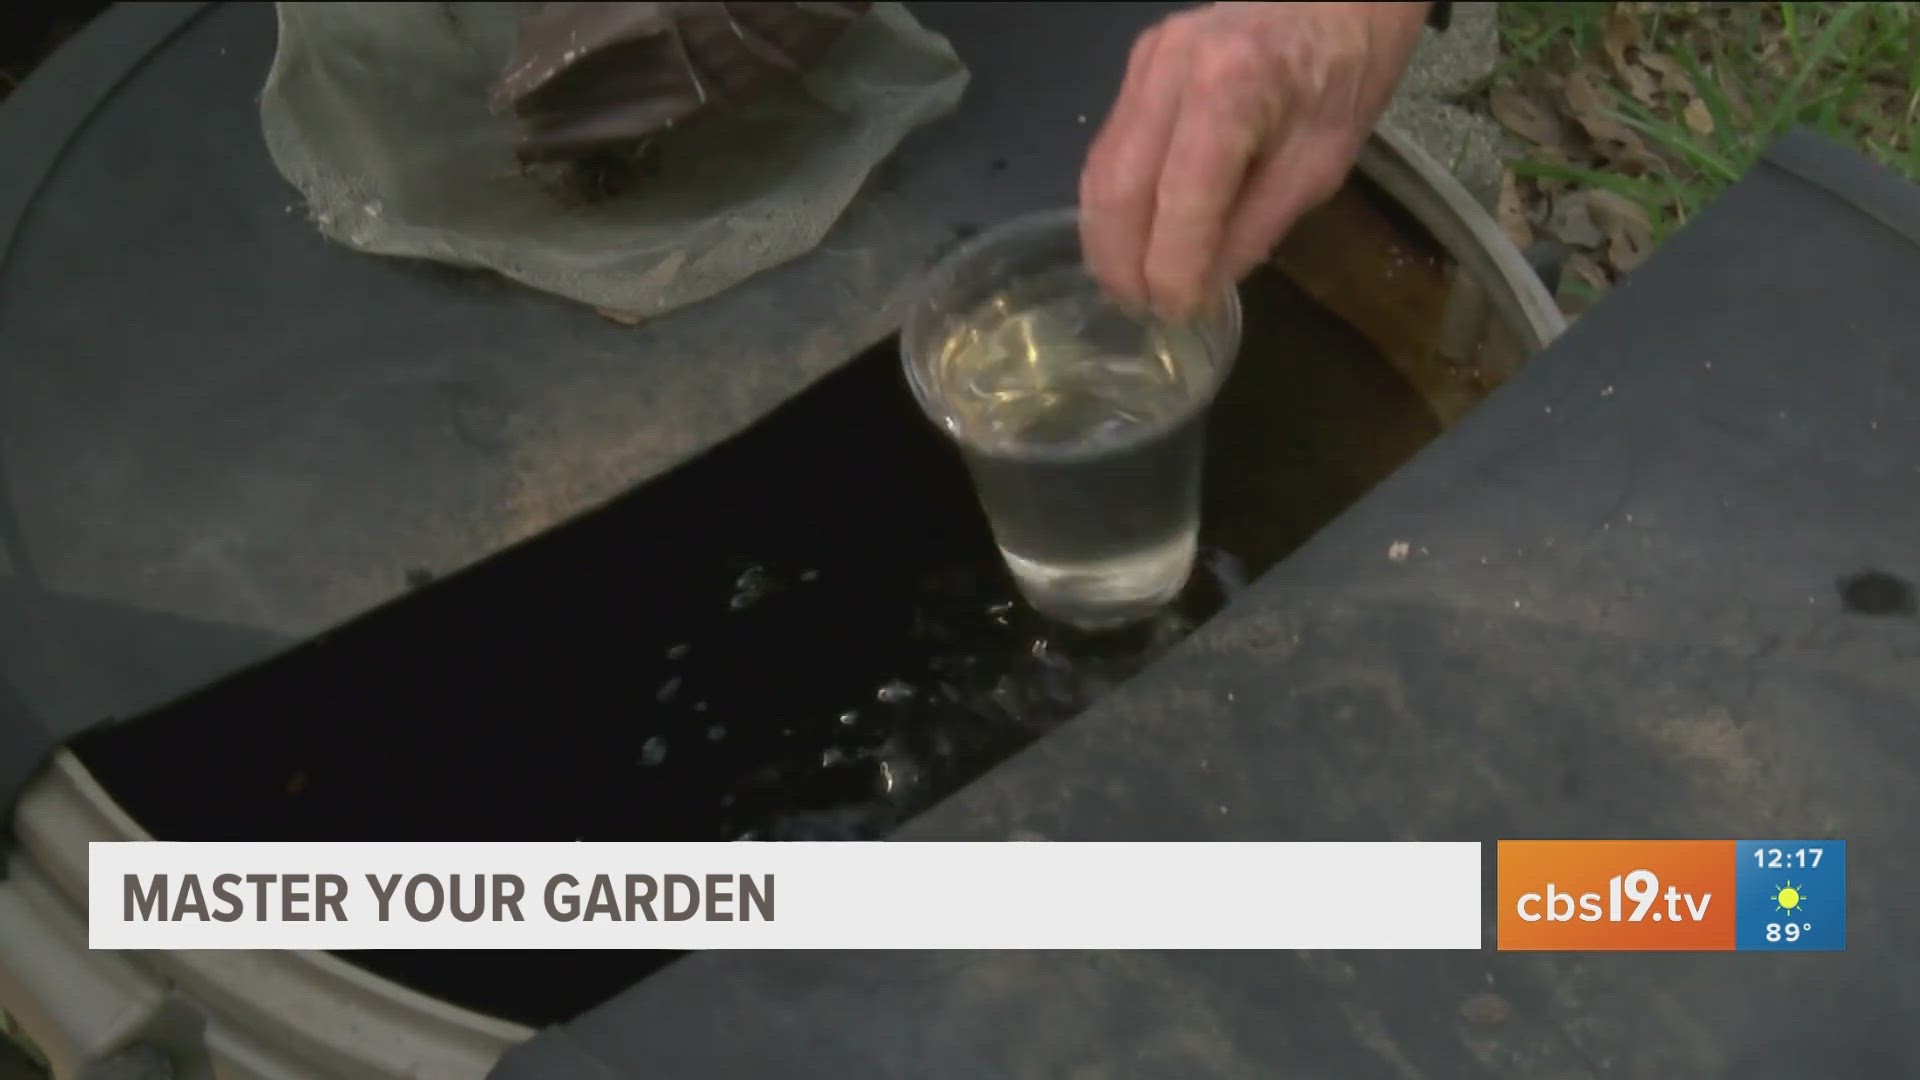 The Smith County Master Gardeners teach us about harvesting rainwater.